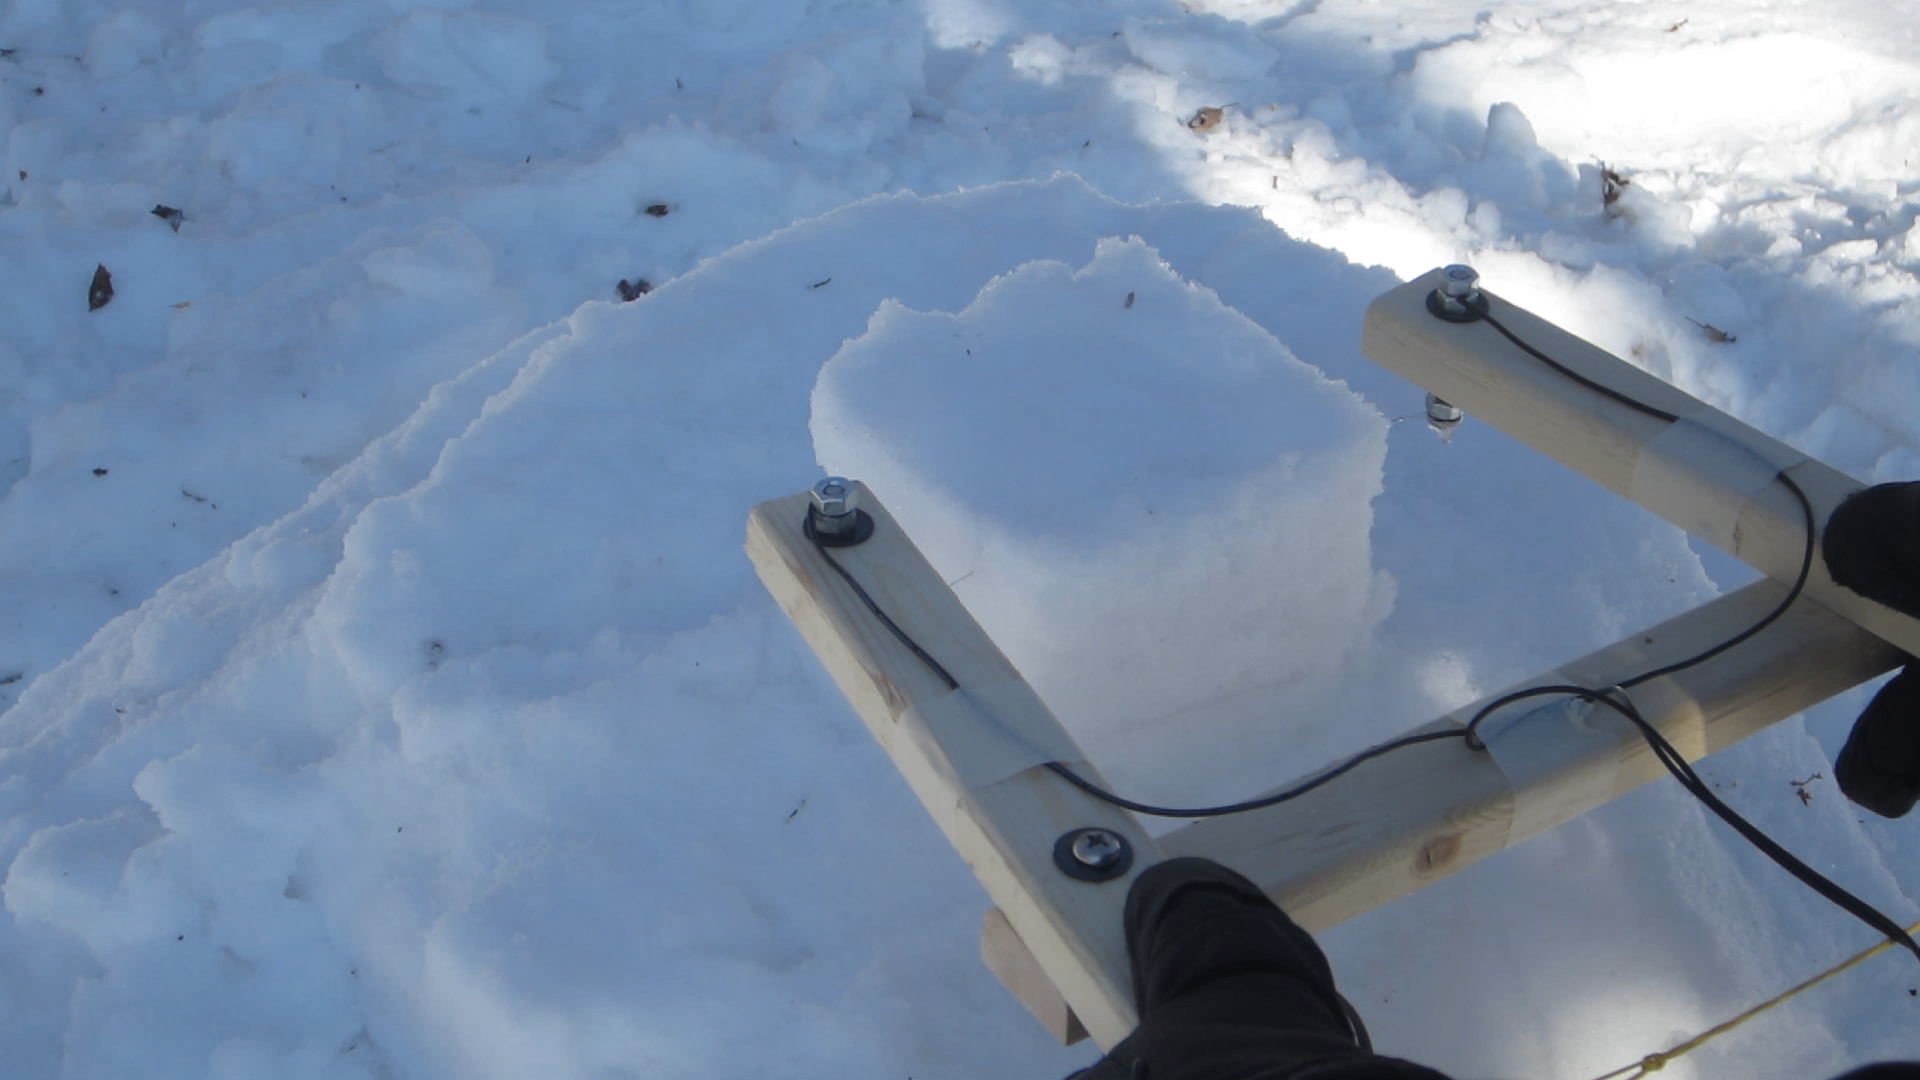 Sculpt Snow and Ice With This Hot Wire Cutter